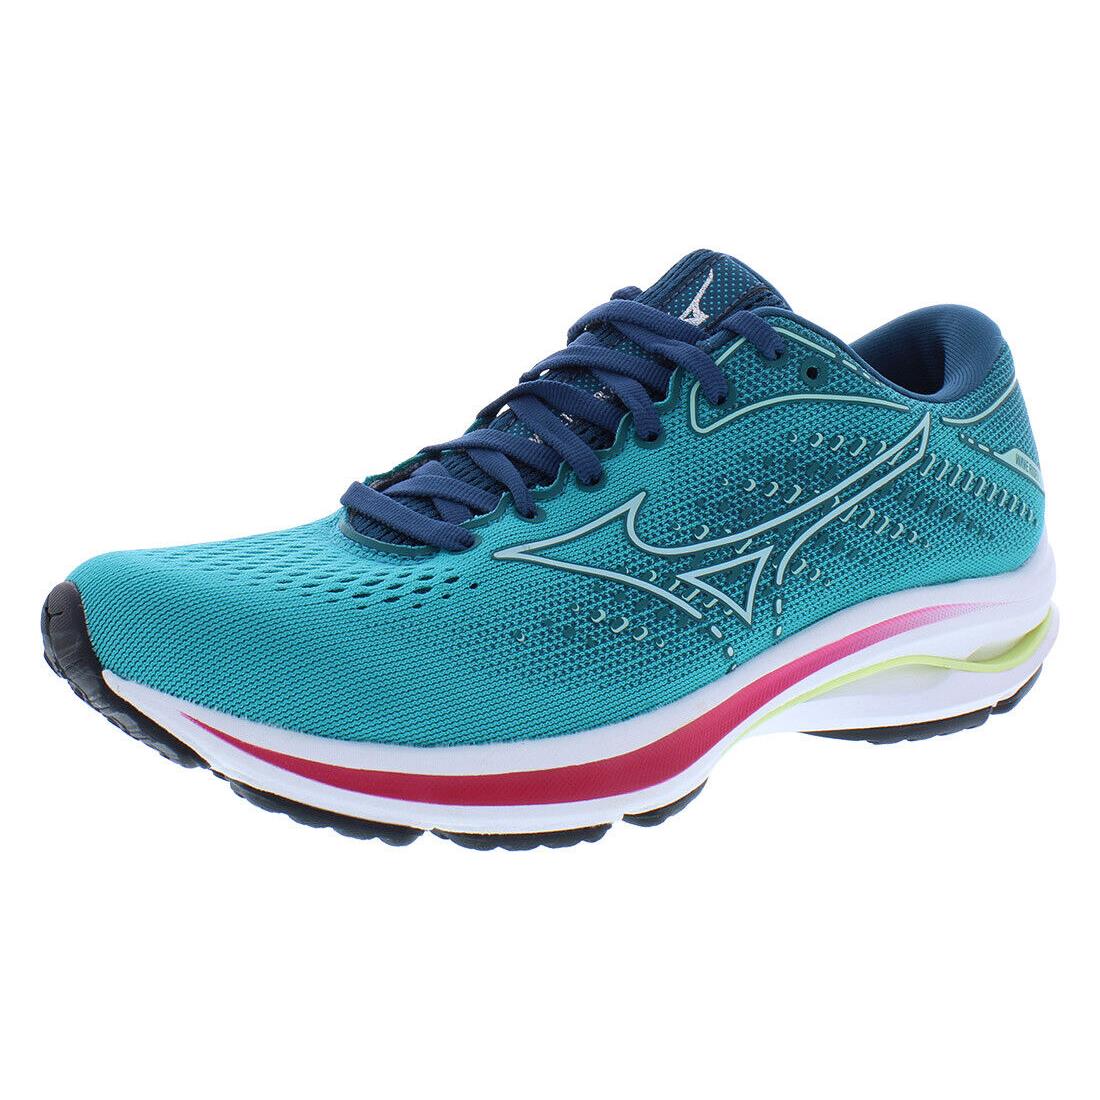 Mizuno Wave Rider Womens Shoes Size 7 Color: Turquoise/pink/yellow/white - Turquoise/Pink/Yellow/White, Main: Turquoise